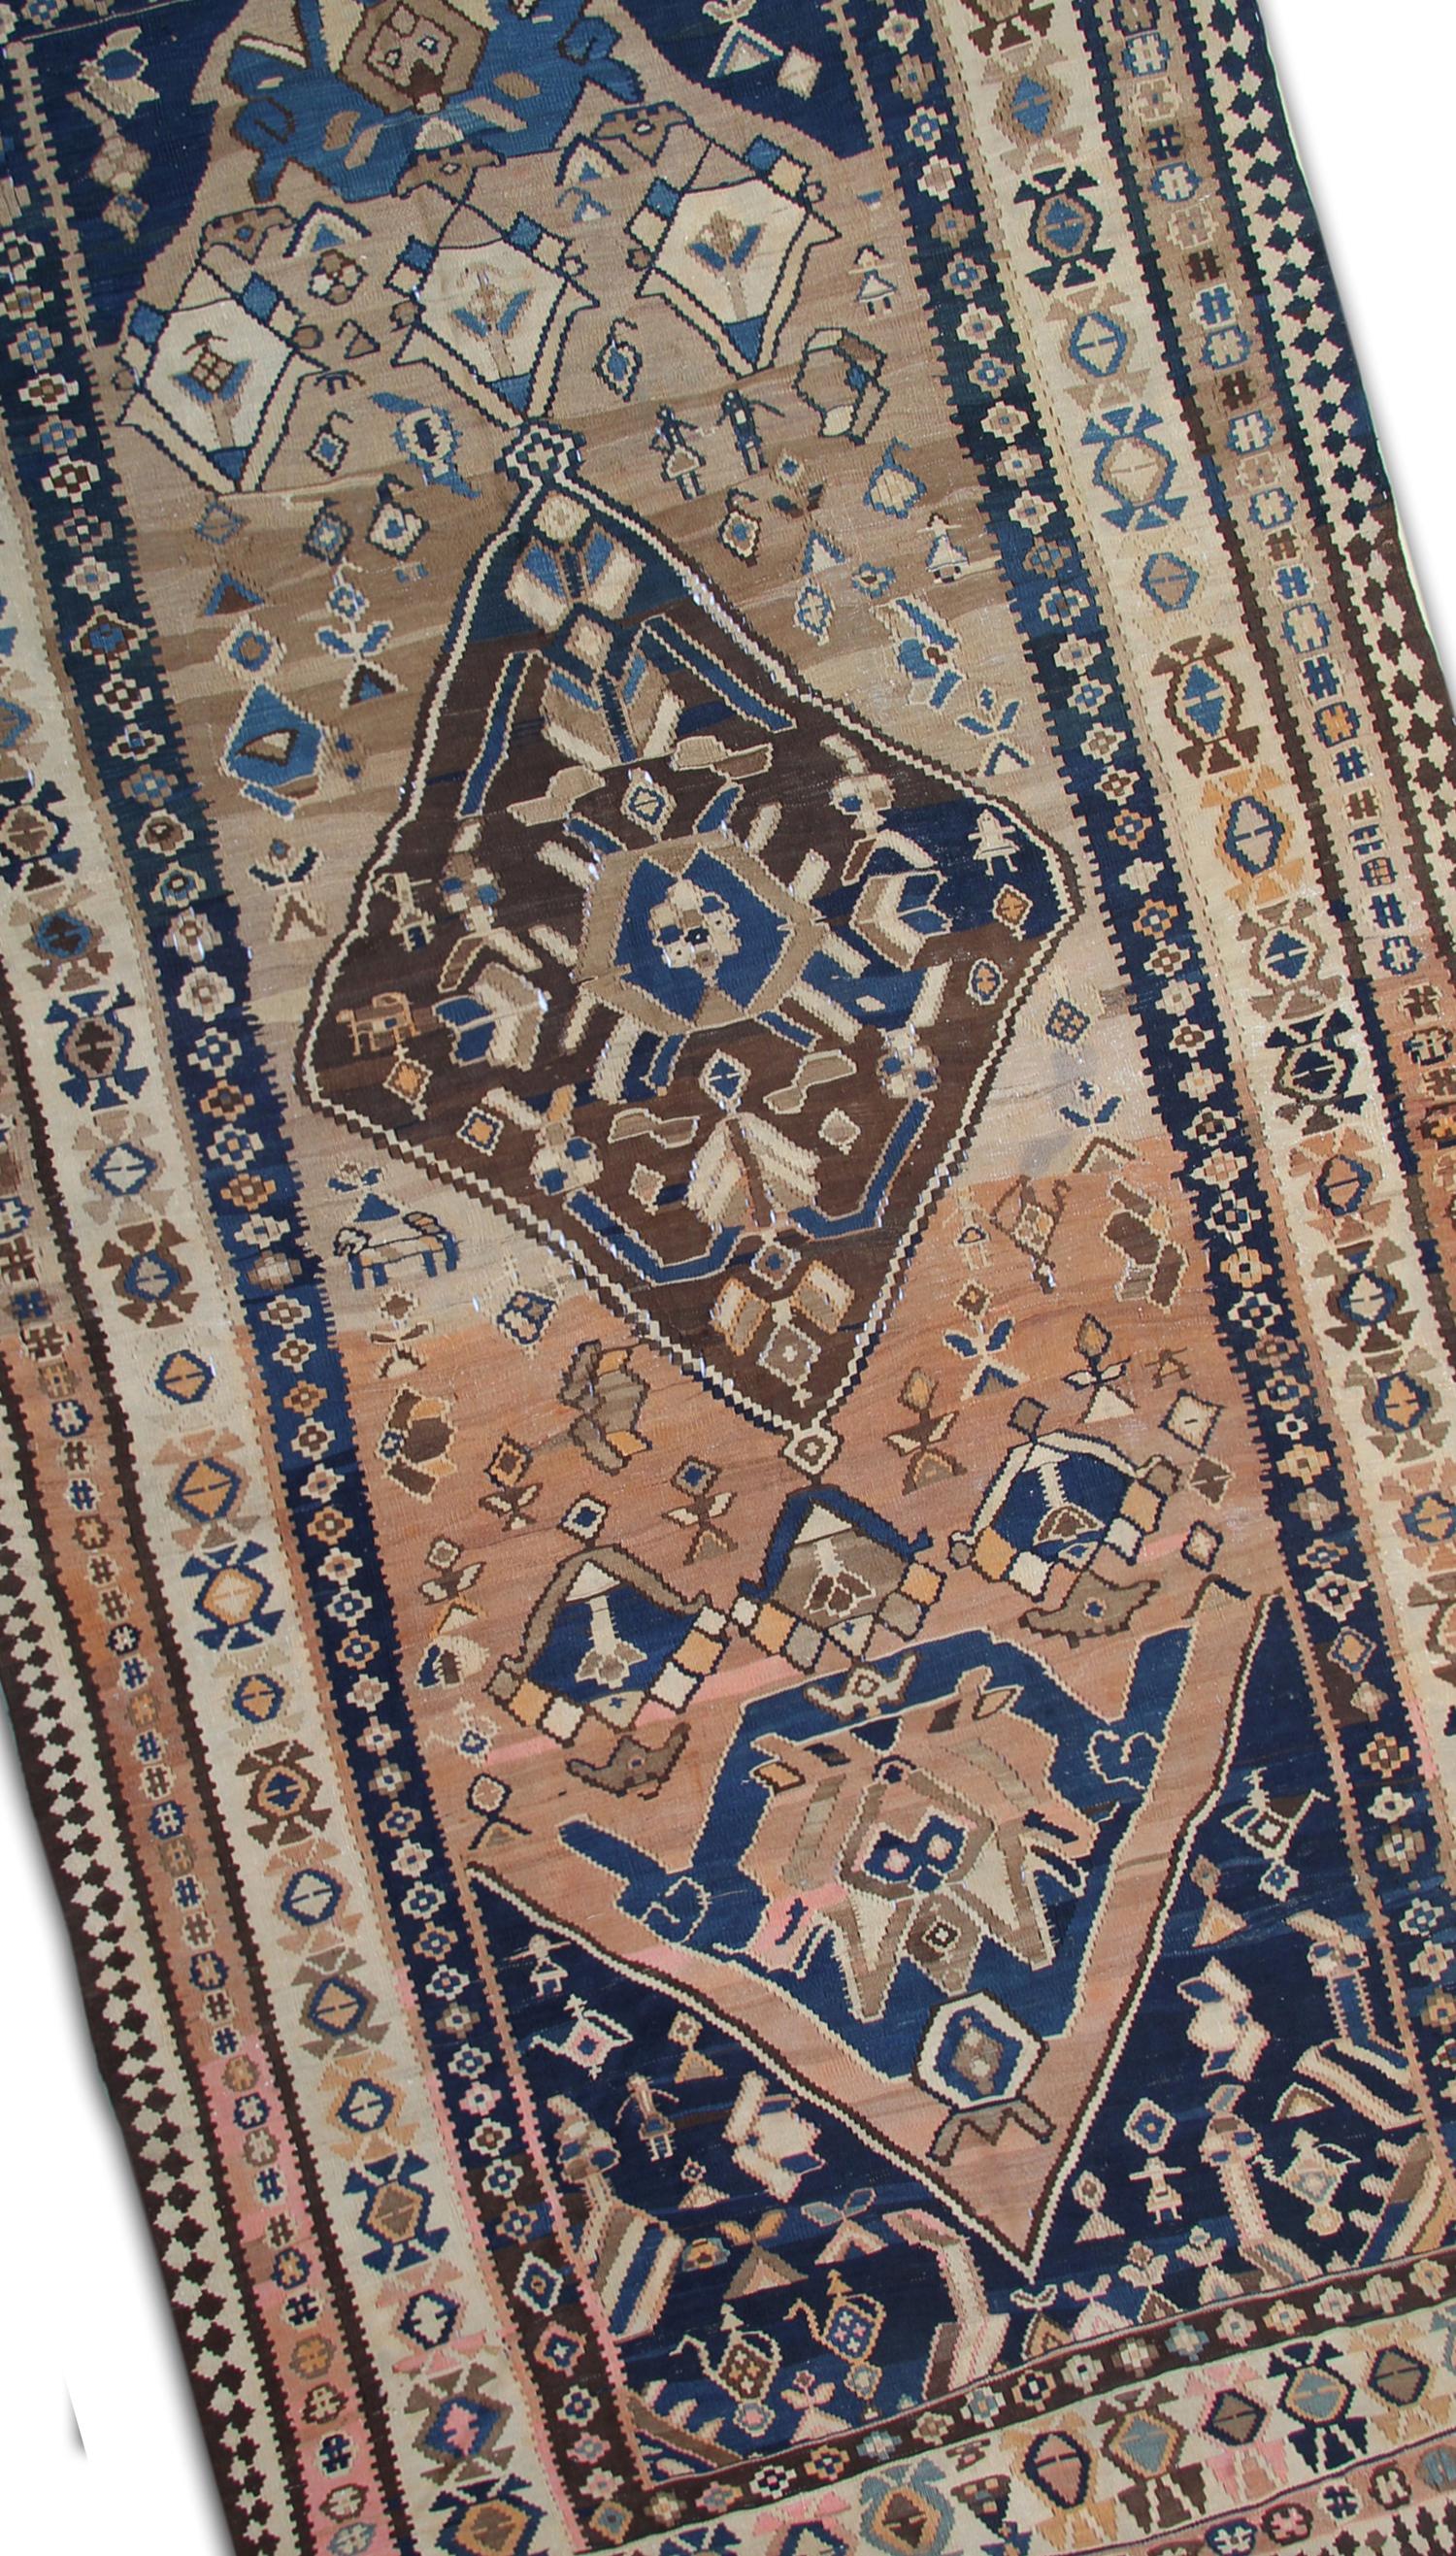 This fine wool Kilim is a fantastic example of Kilims woven in the 1890s. The design features a bold medallion woven in brown with Brown, beige and blue accents. The colour palette is unique, with rustic blue and rust and brown accents. This antique